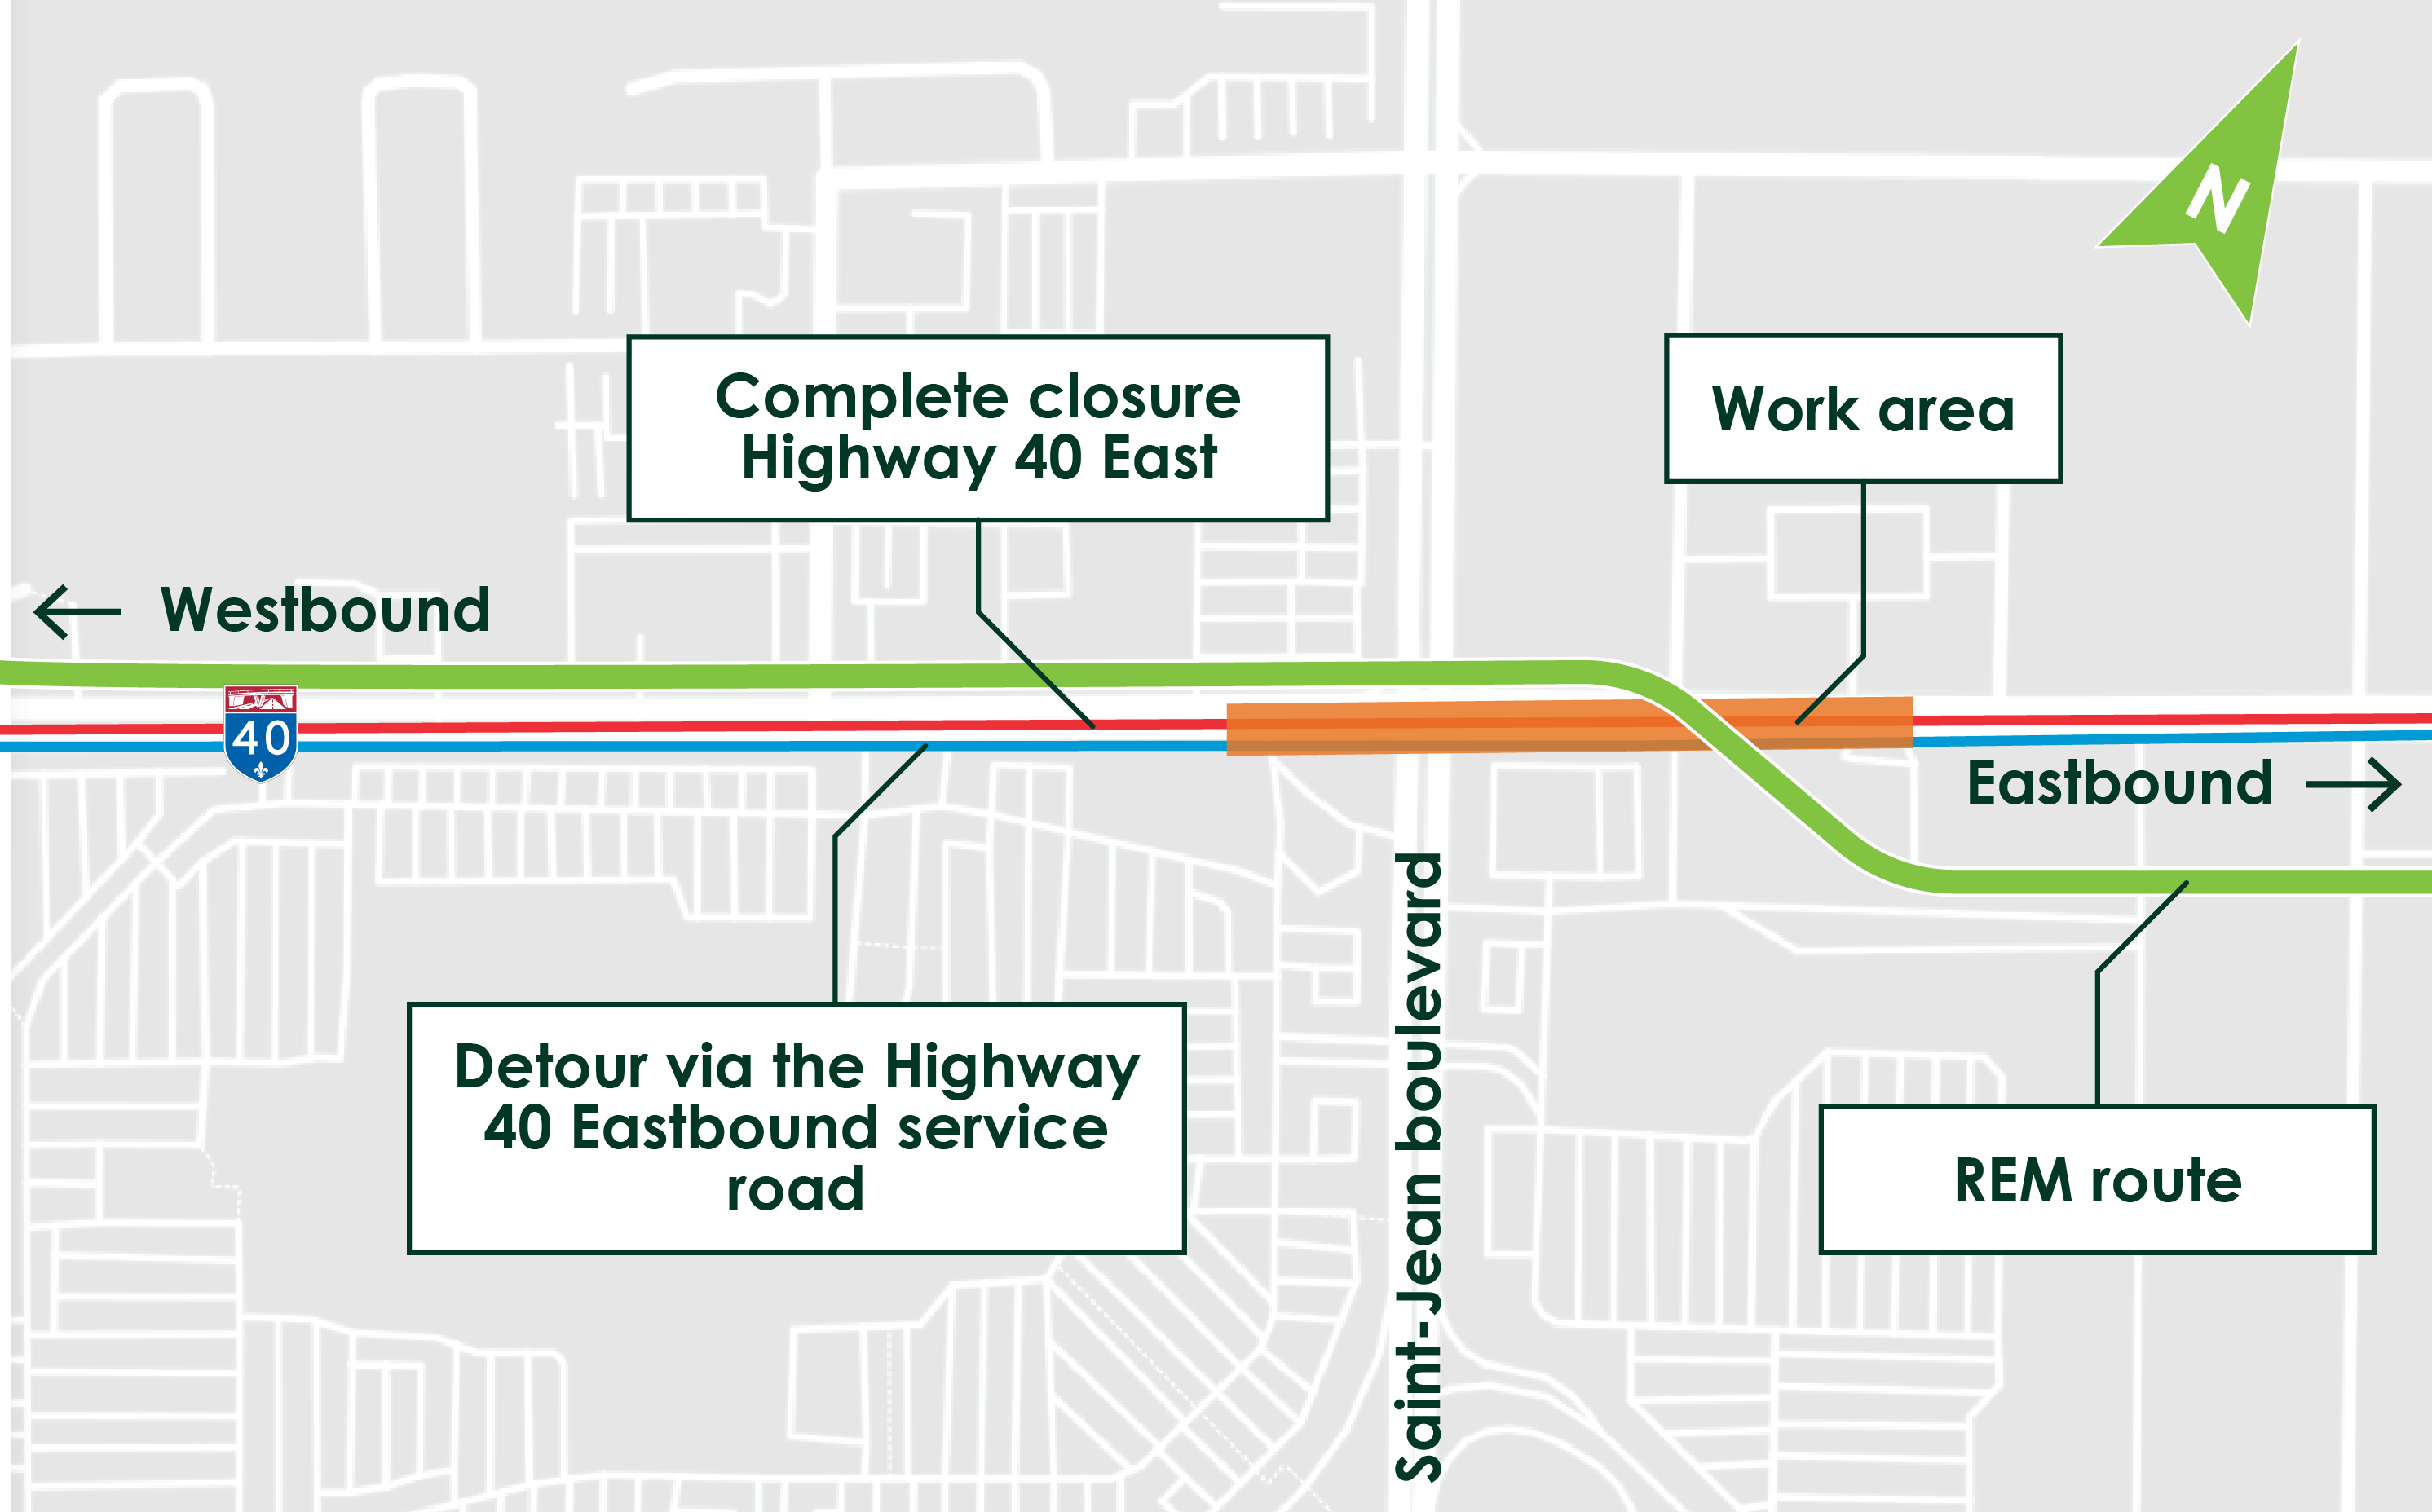 Stage 1, complete closure of highway 40 East